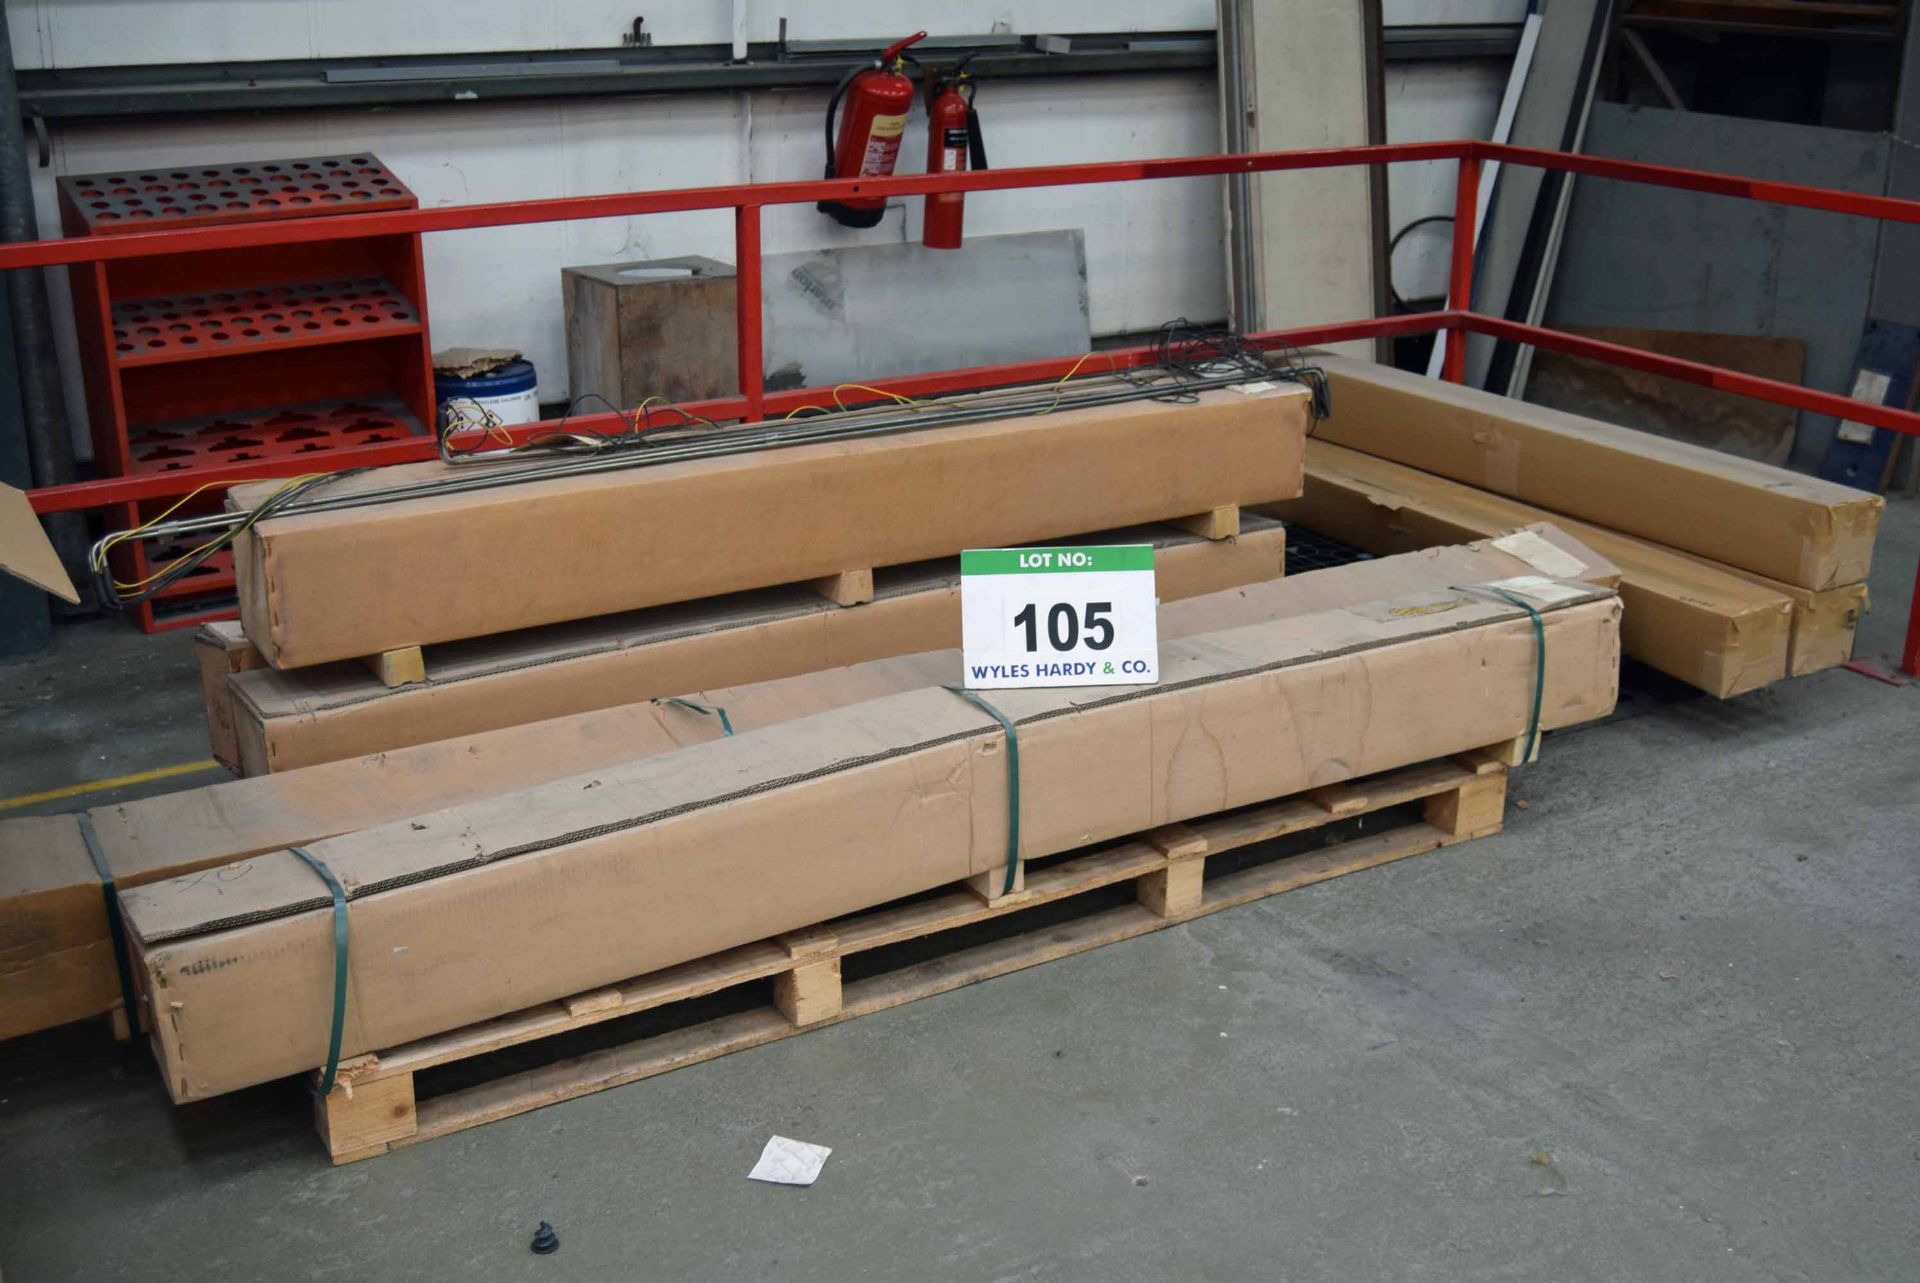 Three Pallets of Evaporating Heater Elements and Trim (As Photographed)